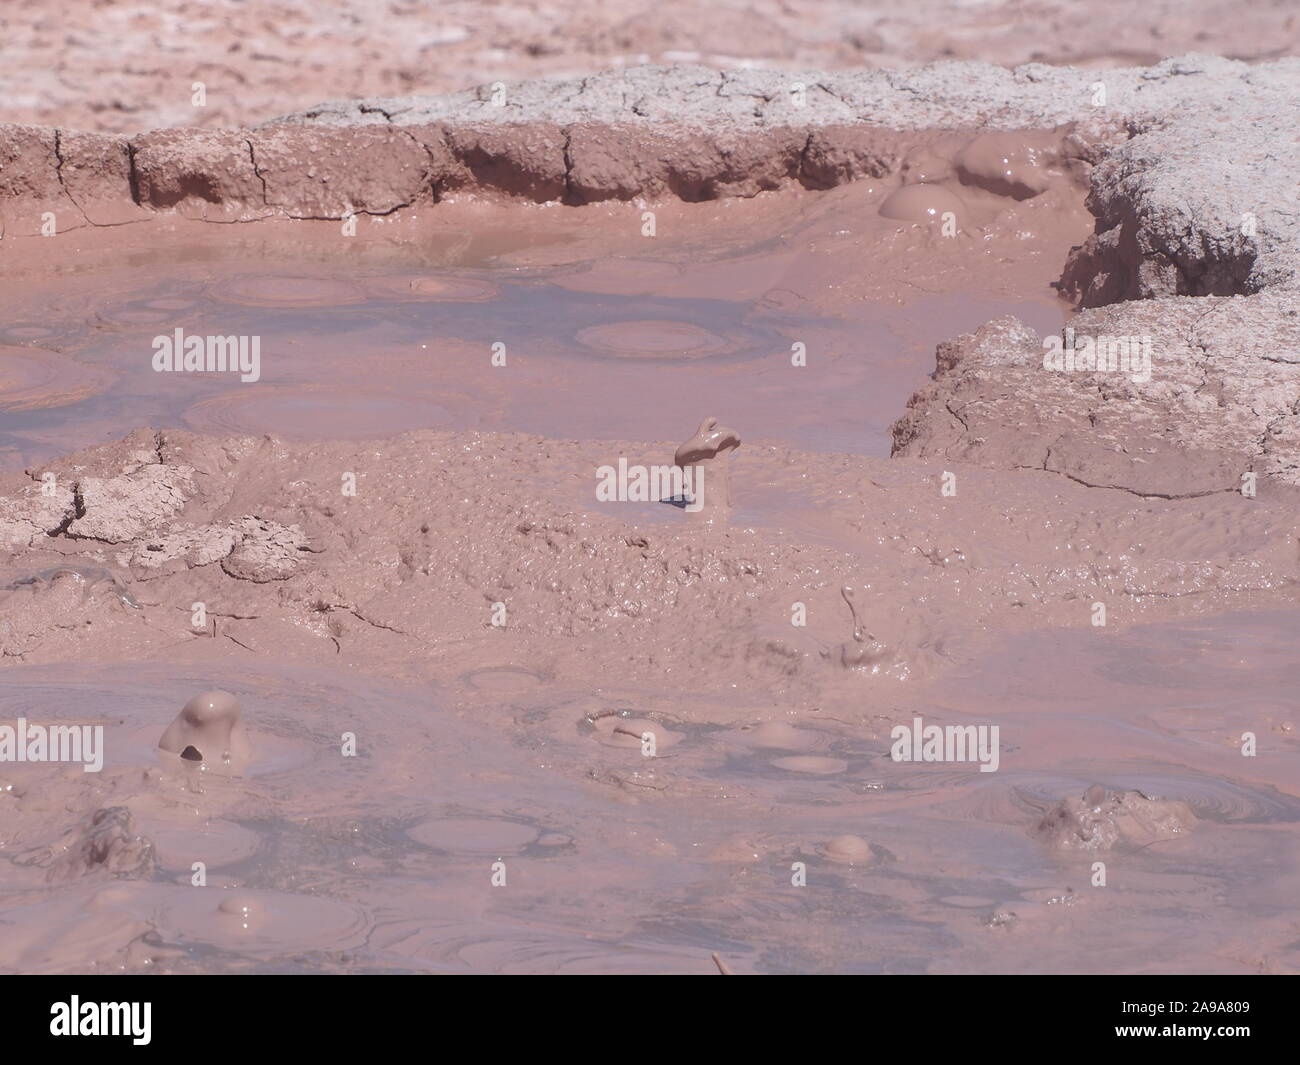 Geothermal bubbling mud at a thermal area in the Atacama Highlands in Chile Stock Photo